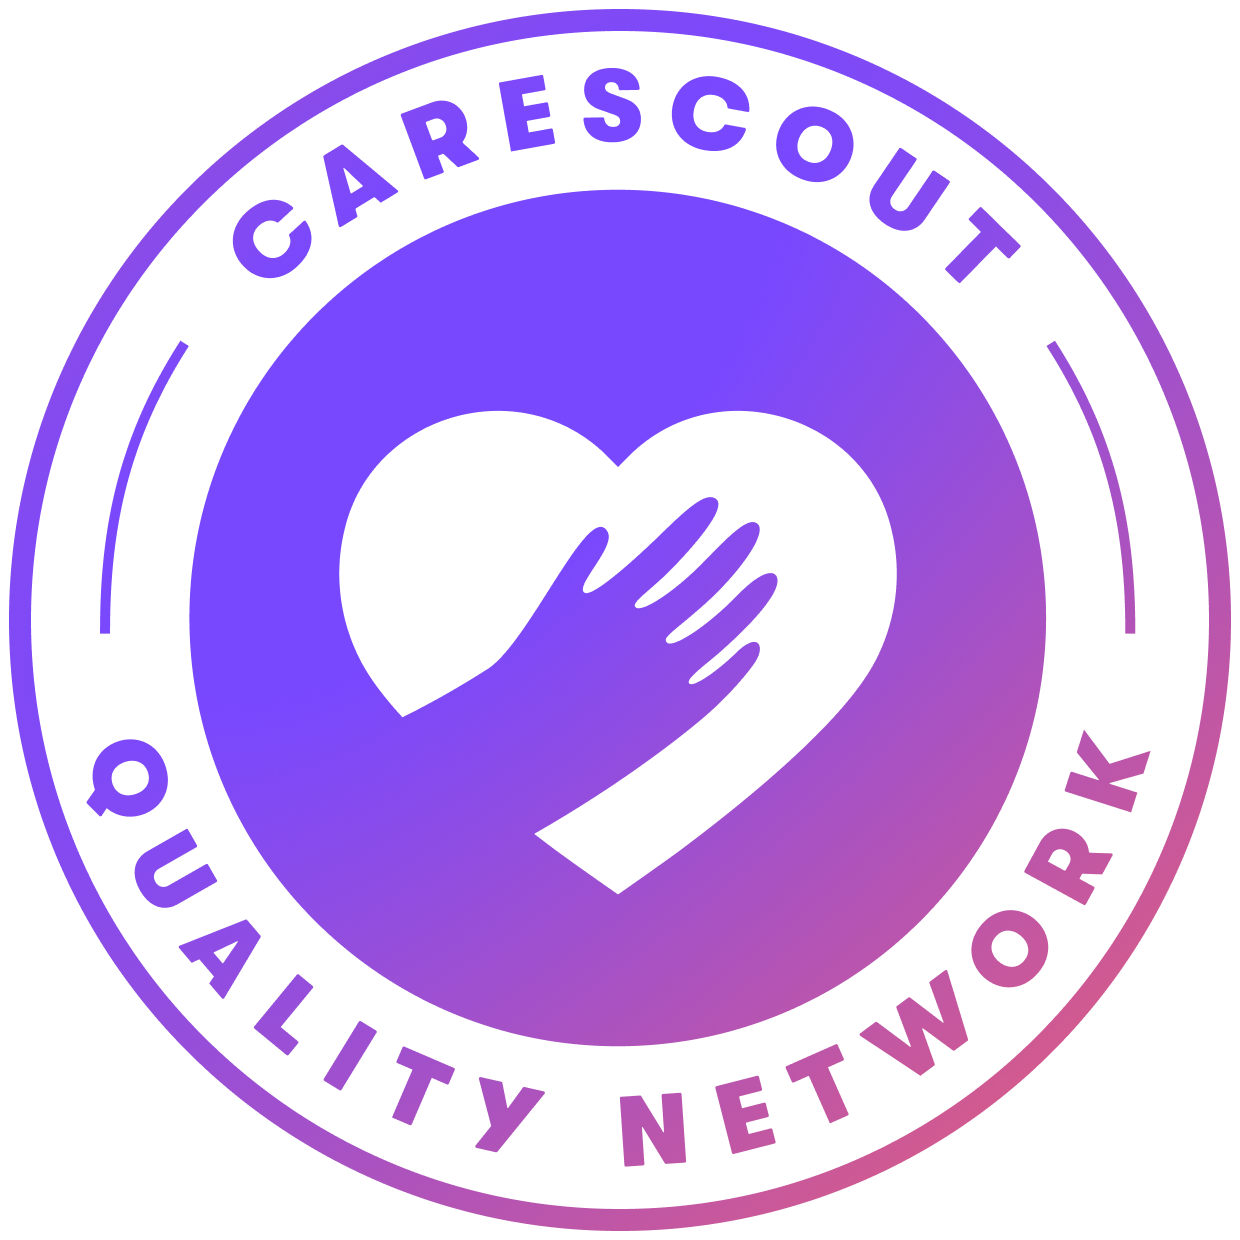 carescout quality network badge gradient